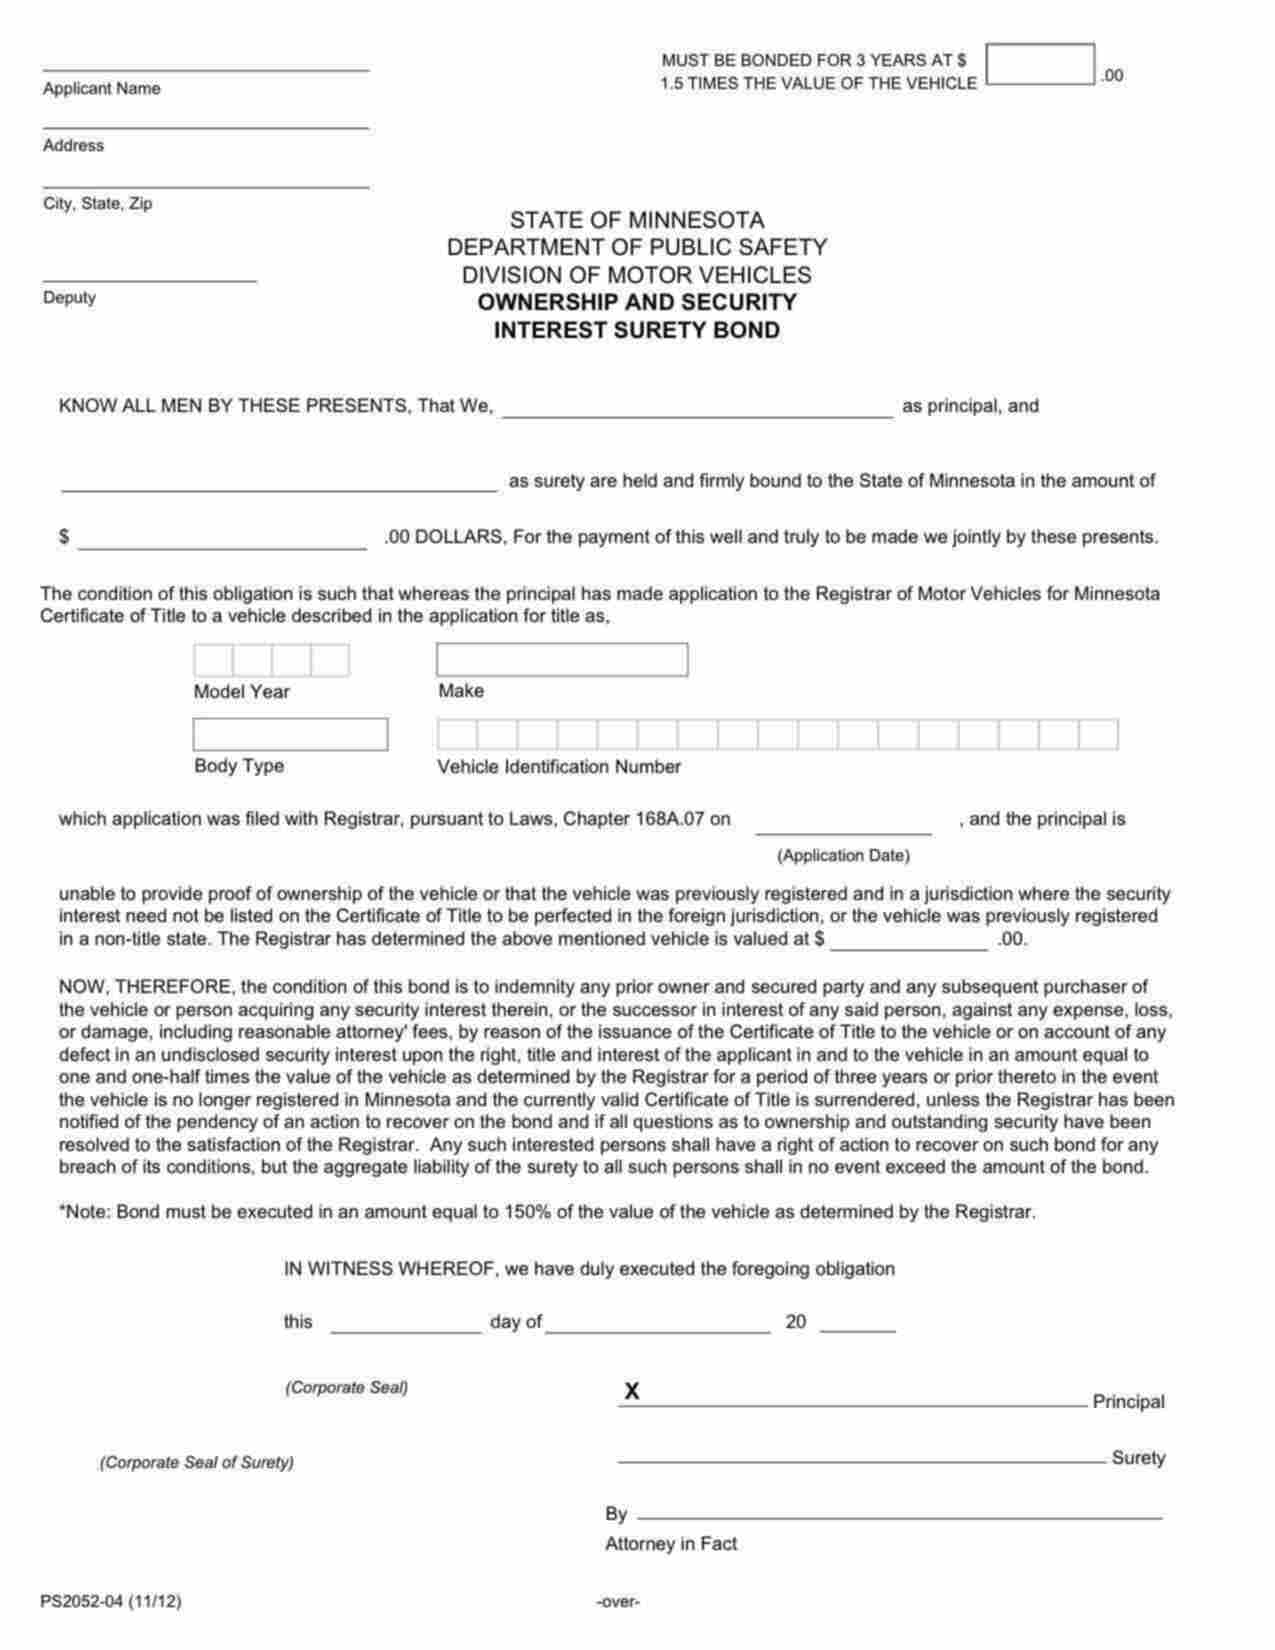 Minnesota Ownership and Security Interest (Lost Title) Bond Form